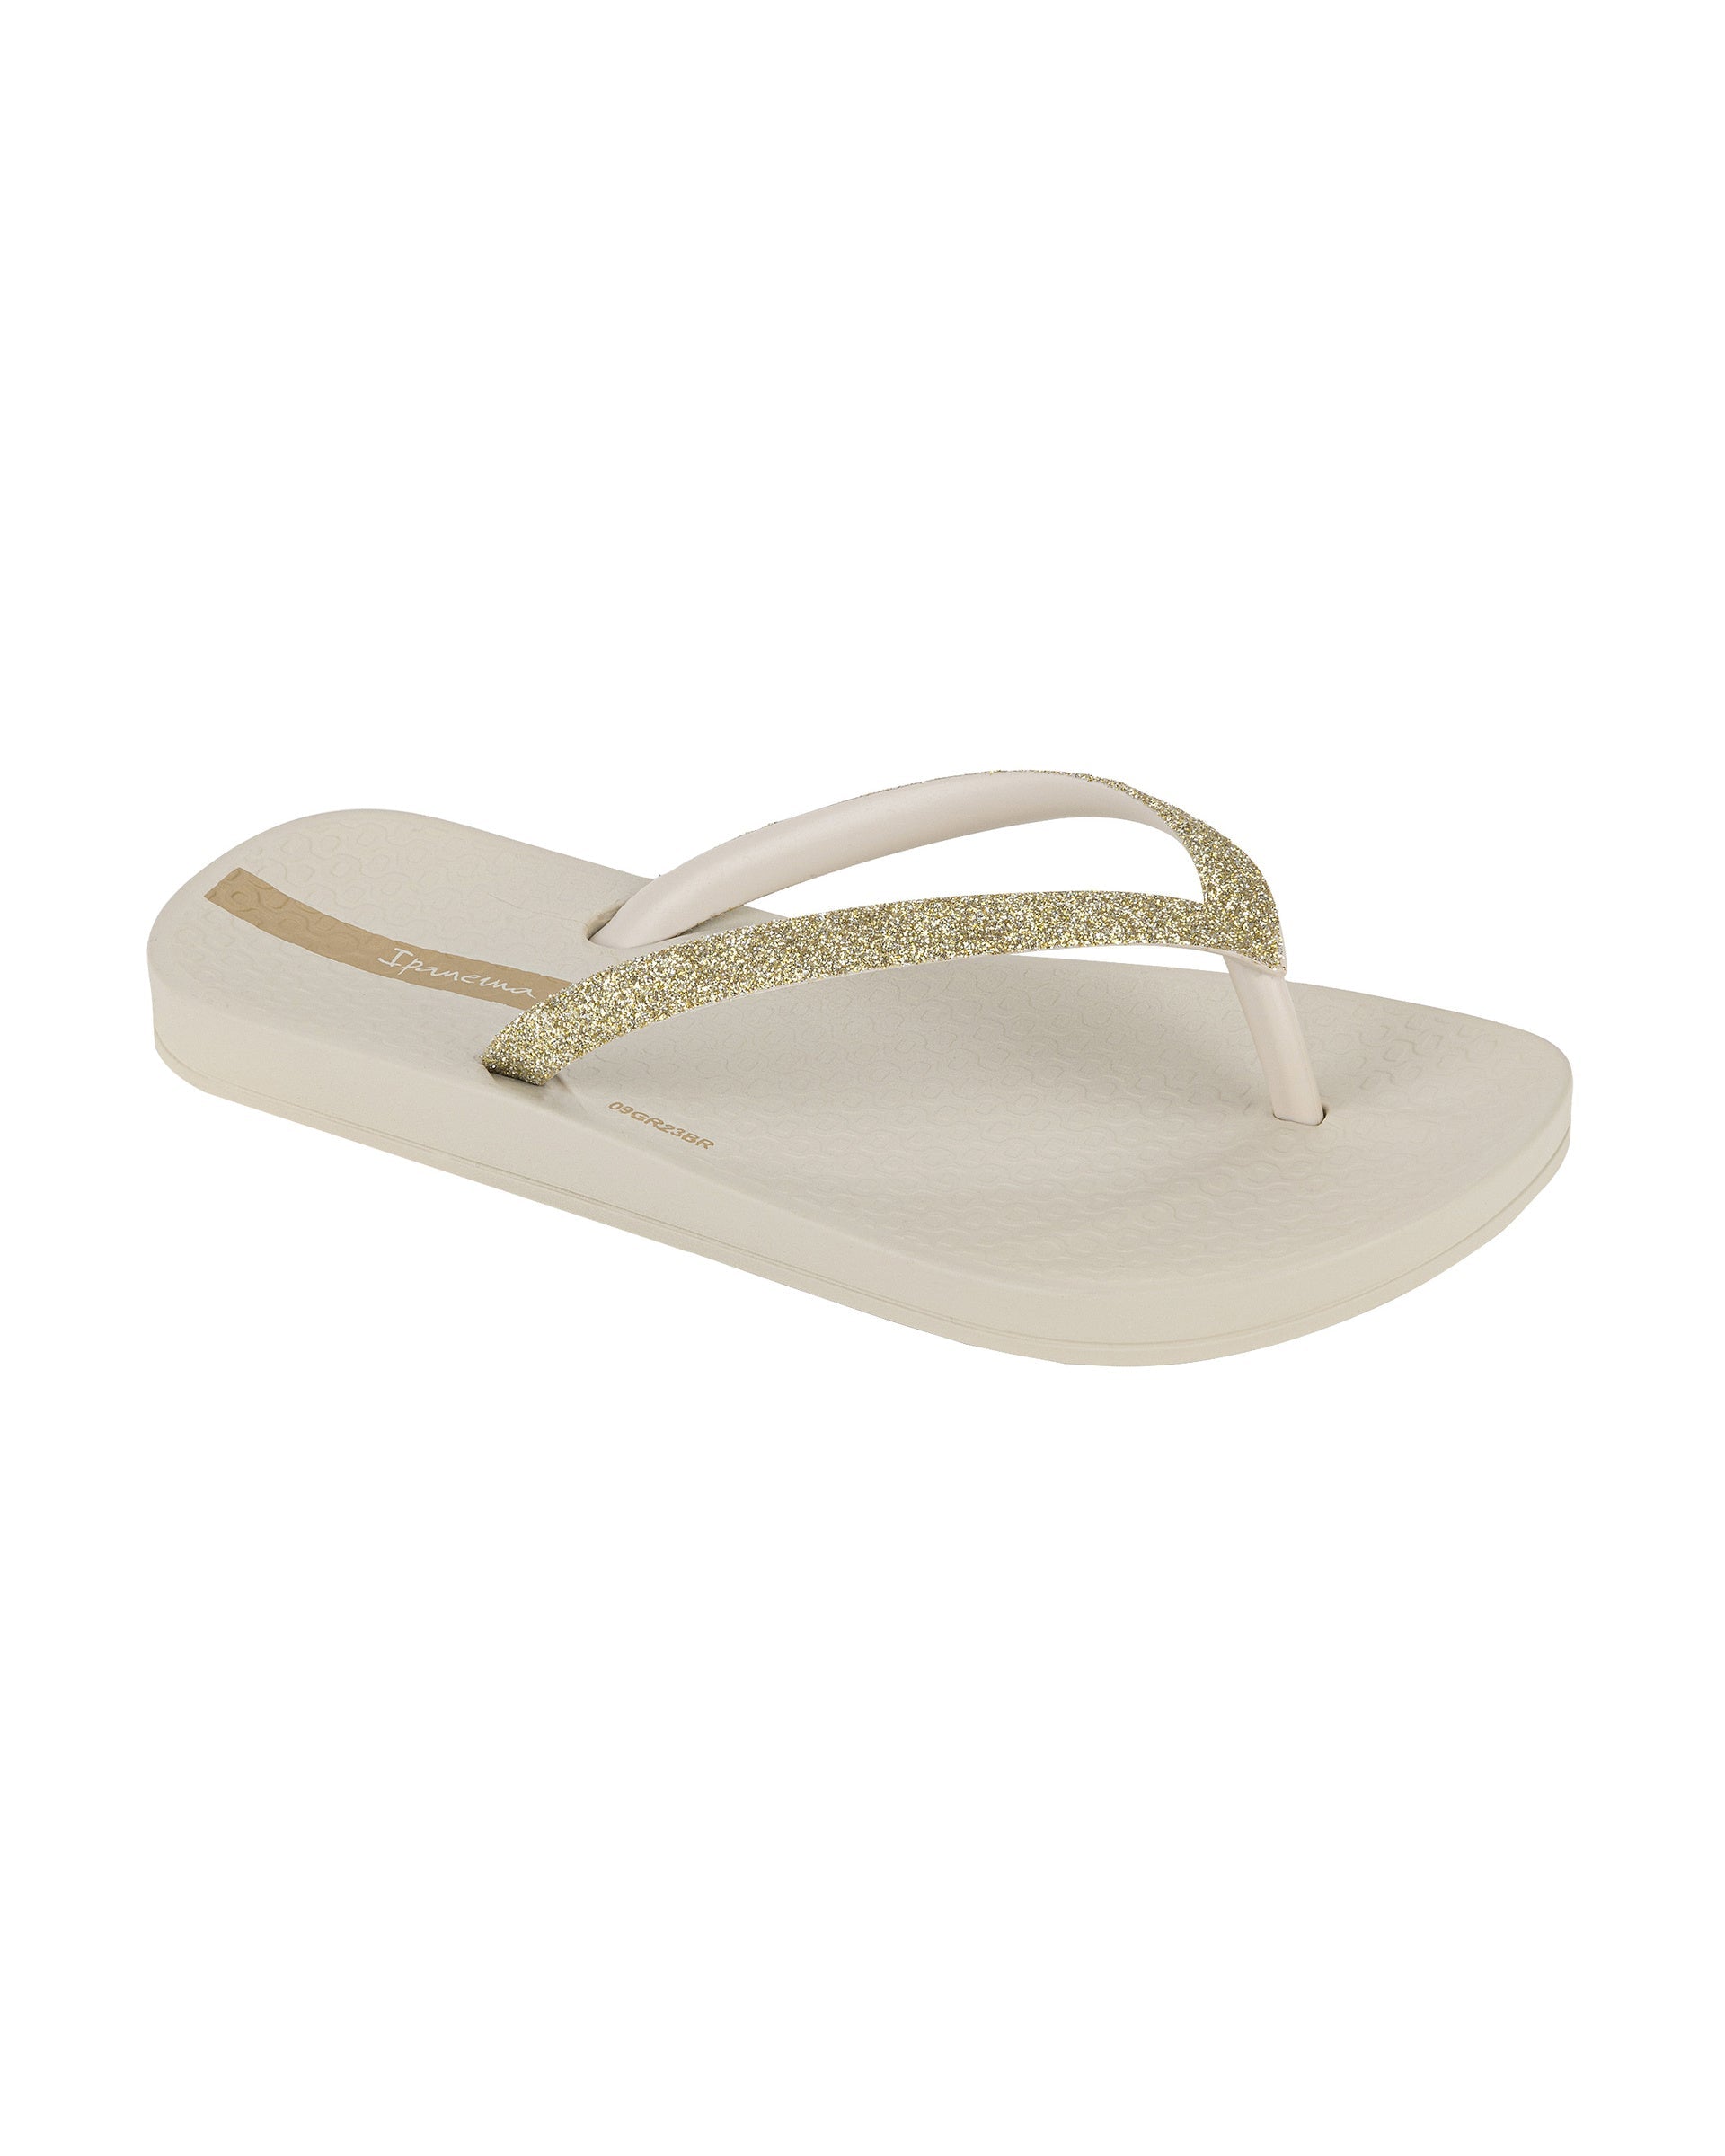 Angled view of a beige Ipanema Ana Sparkle kids flip flop with gold glitter strap.